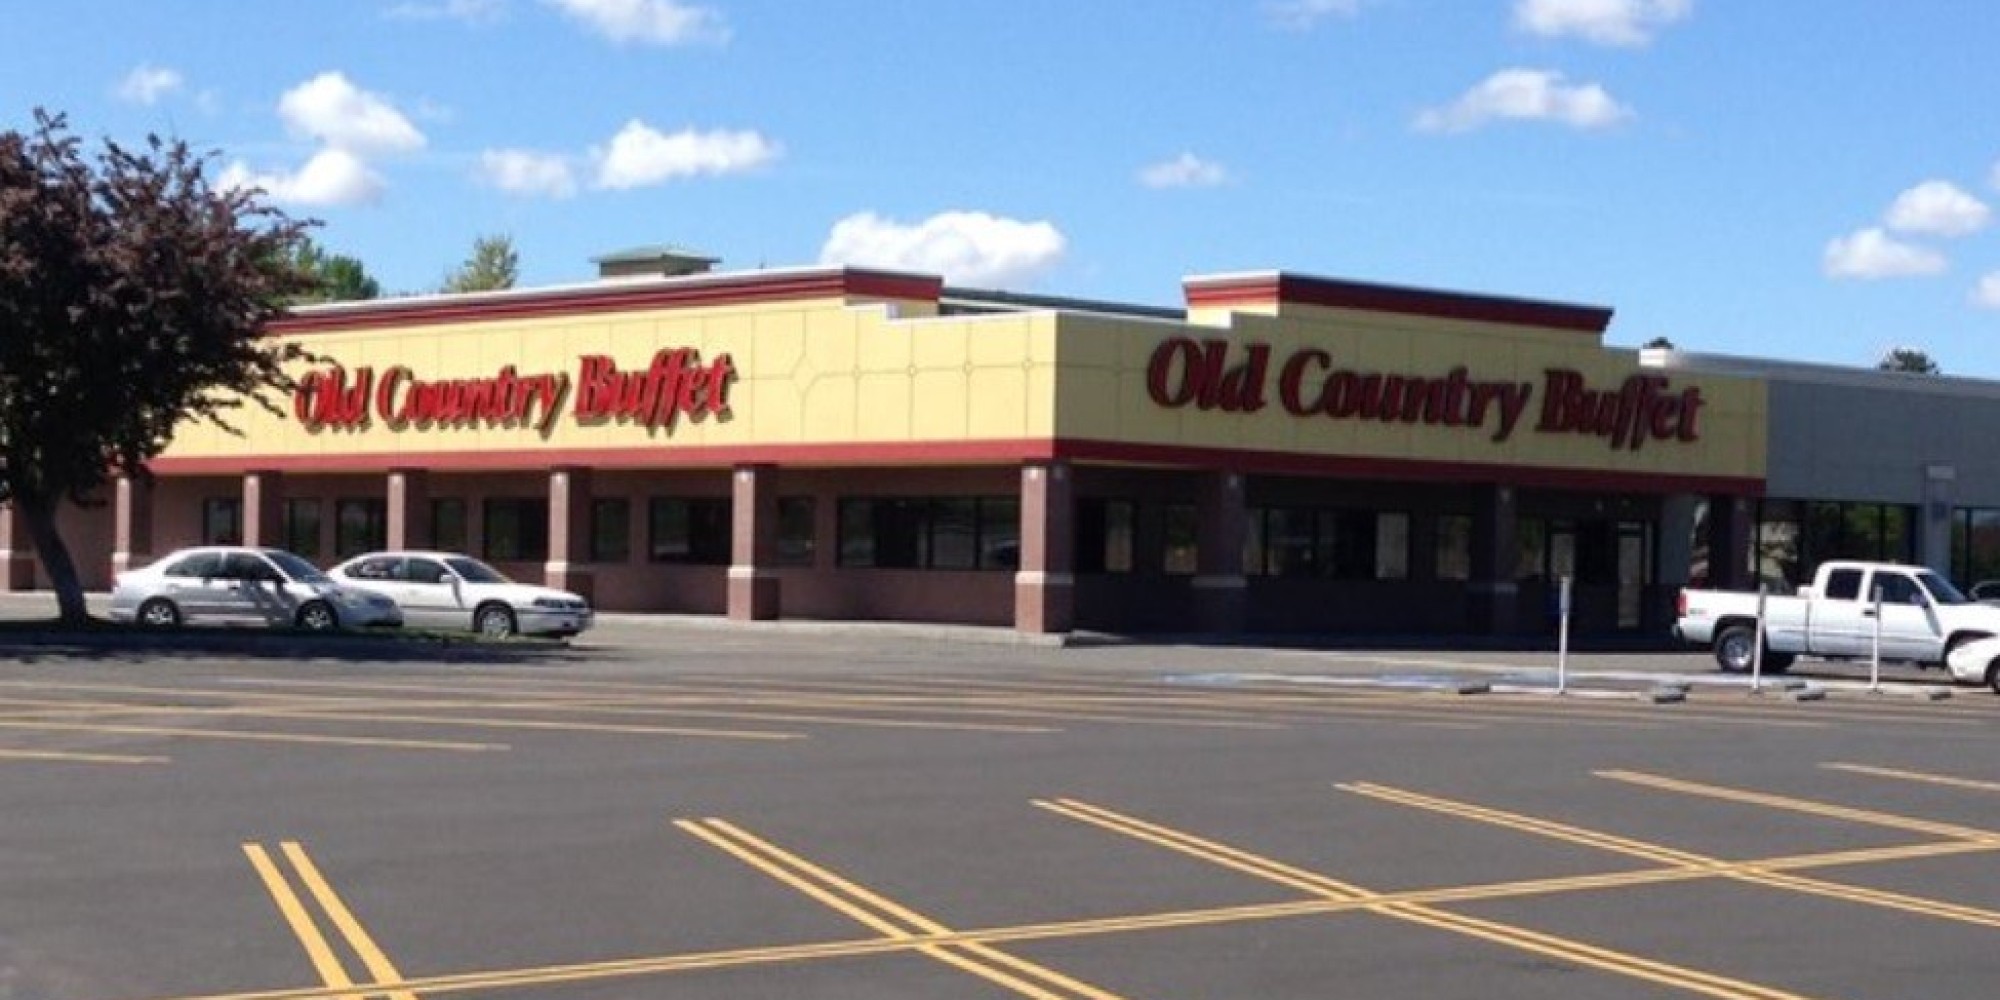 Old country buffet by ford city #9